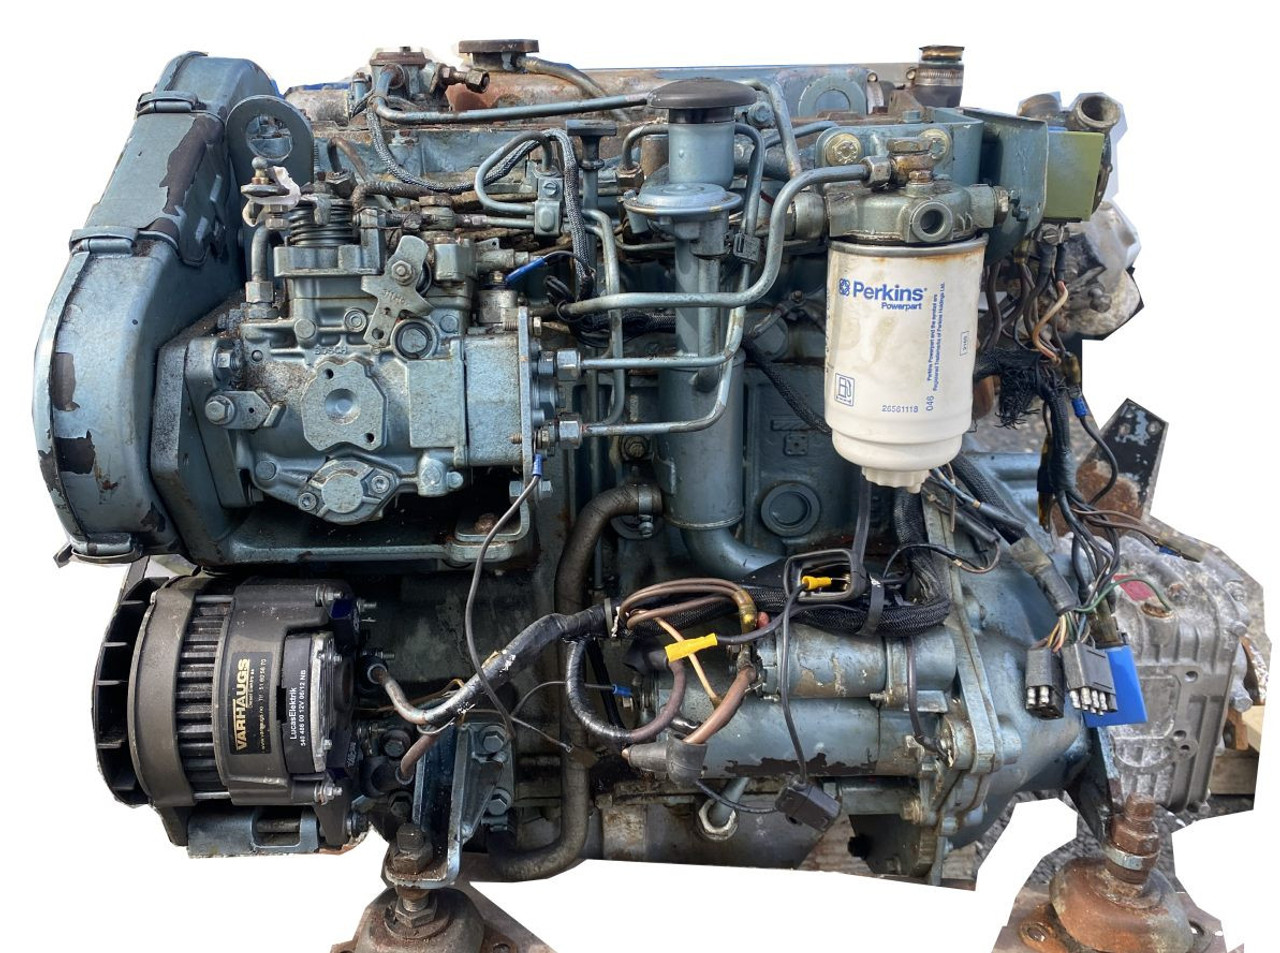 Perkins Prima M50 Engine and gearbox (used)